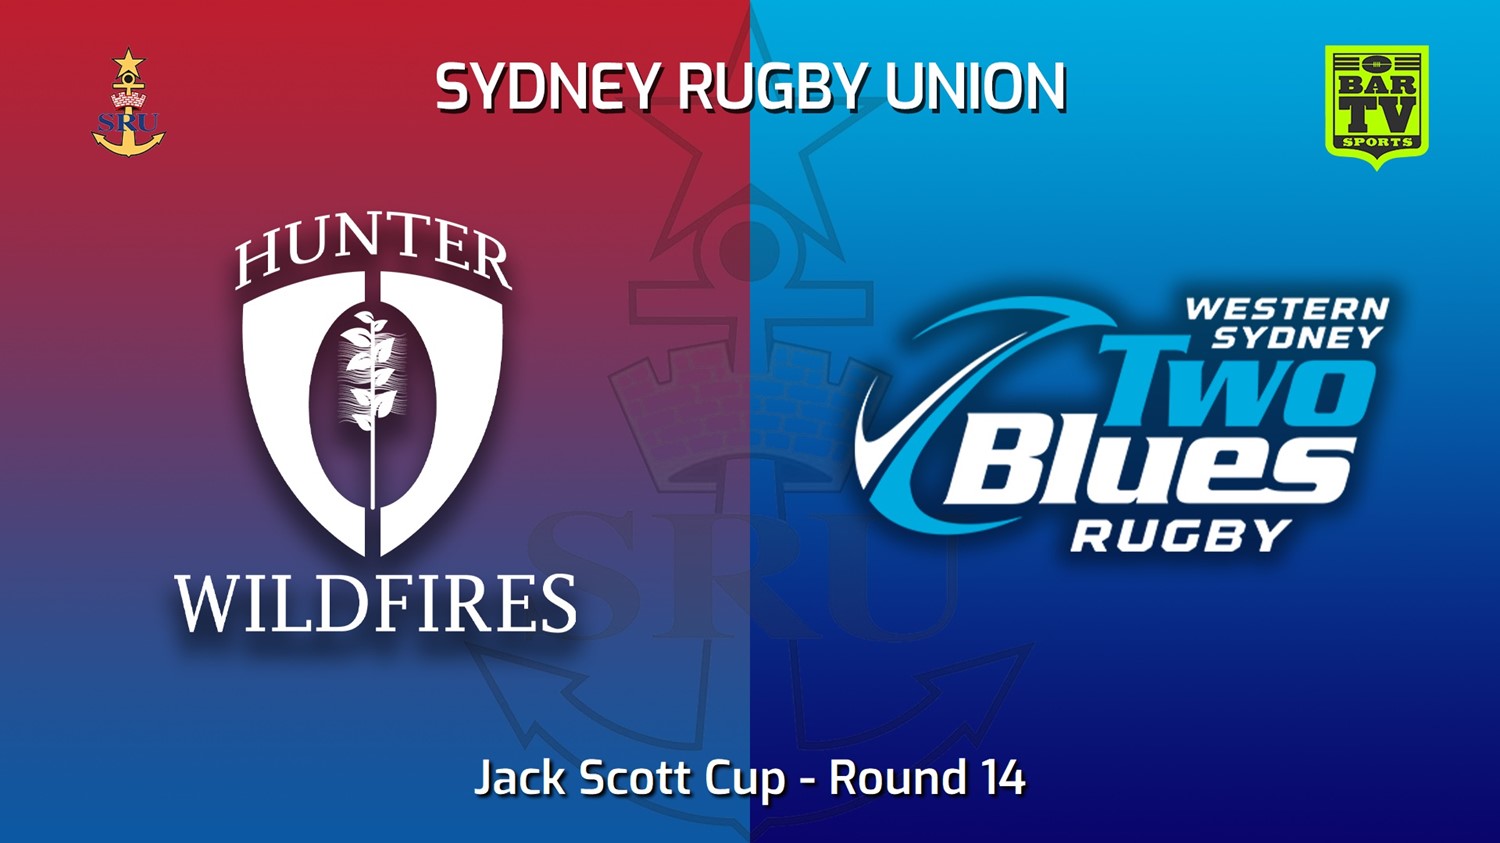 220709-Sydney Rugby Union Round 14 - Jack Scott Cup - Hunter Wildfires v Two Blues Slate Image